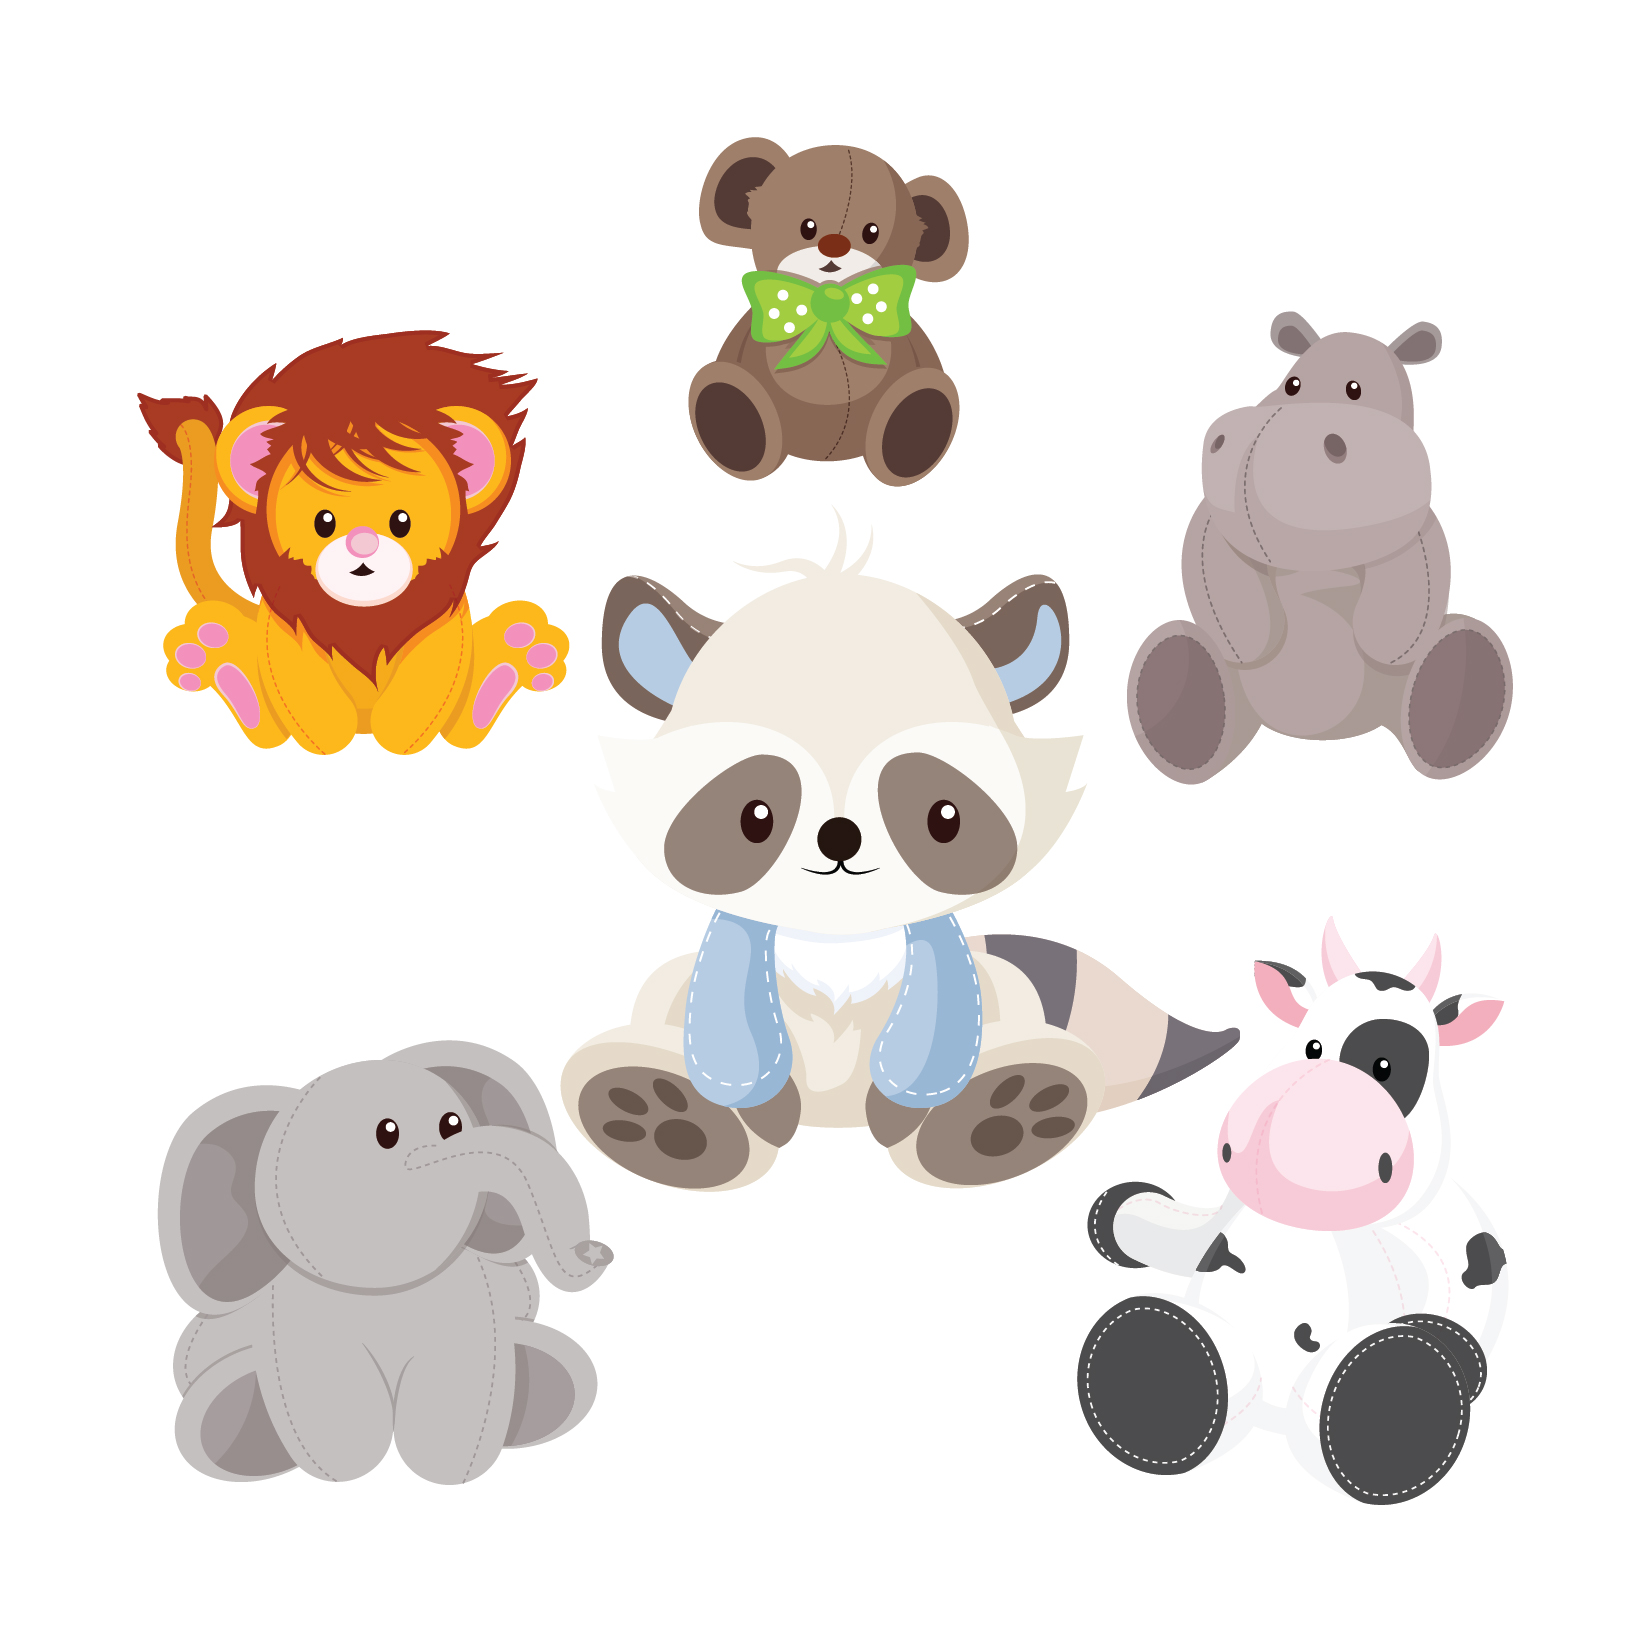 Stuffed Toys Set Semi Exclusive Clip Art Set For Digitizing and More.